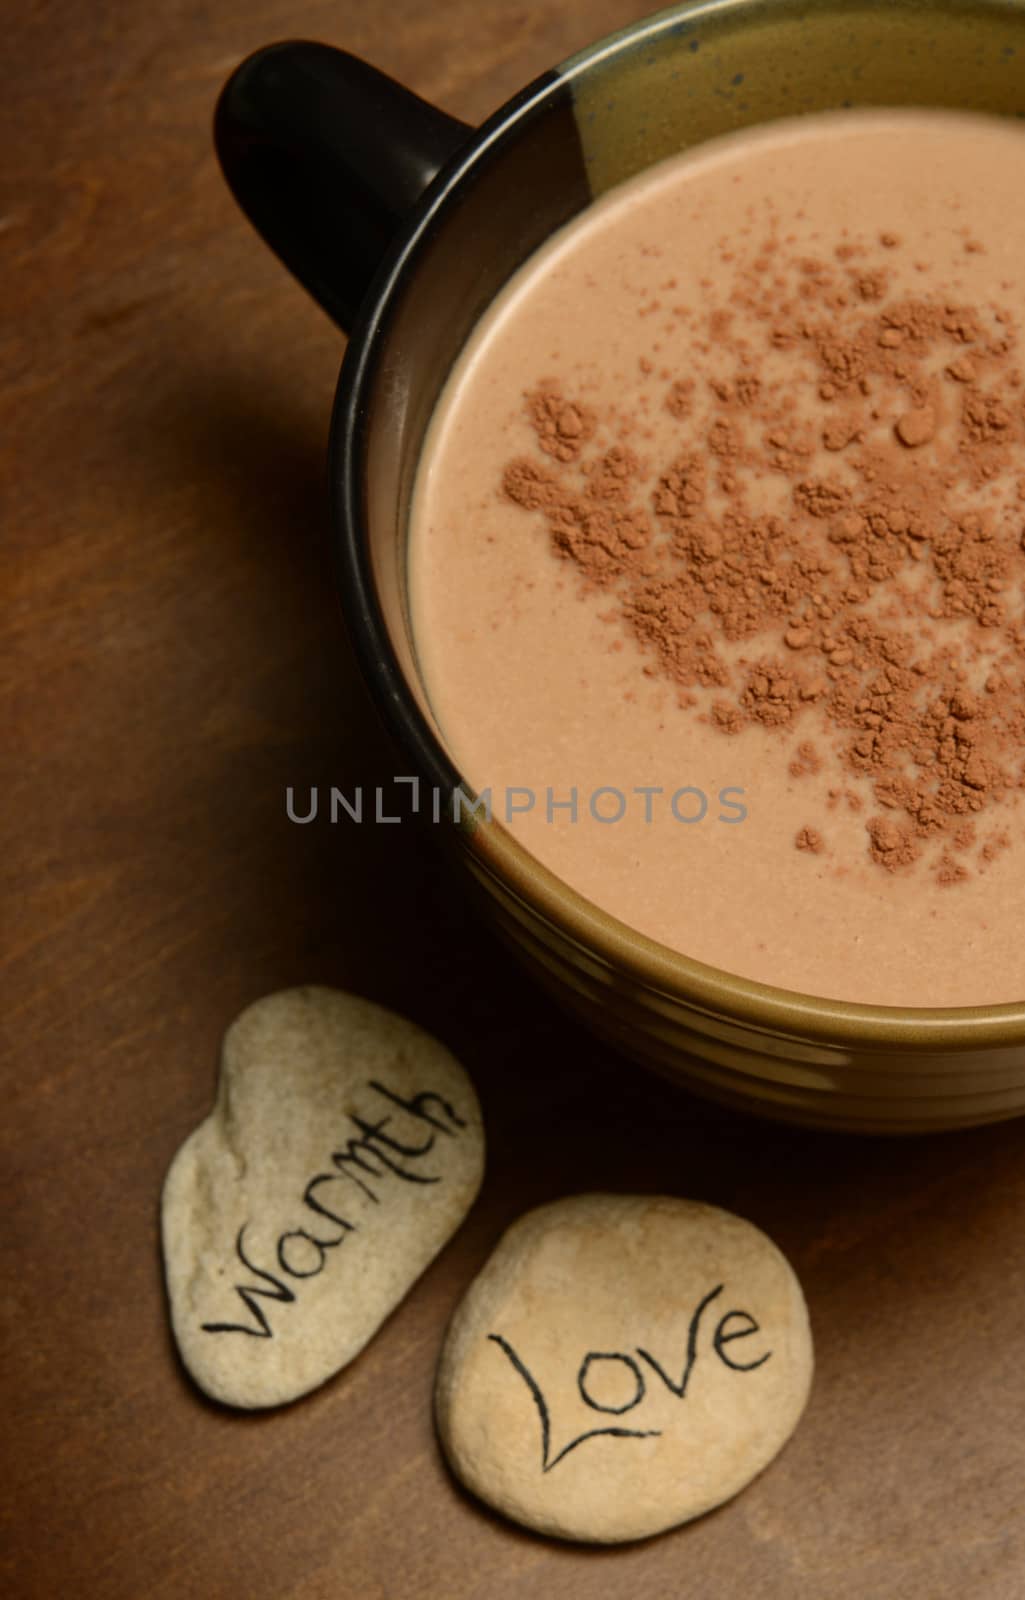 warmth, love and hot chocolate in a cozy setting